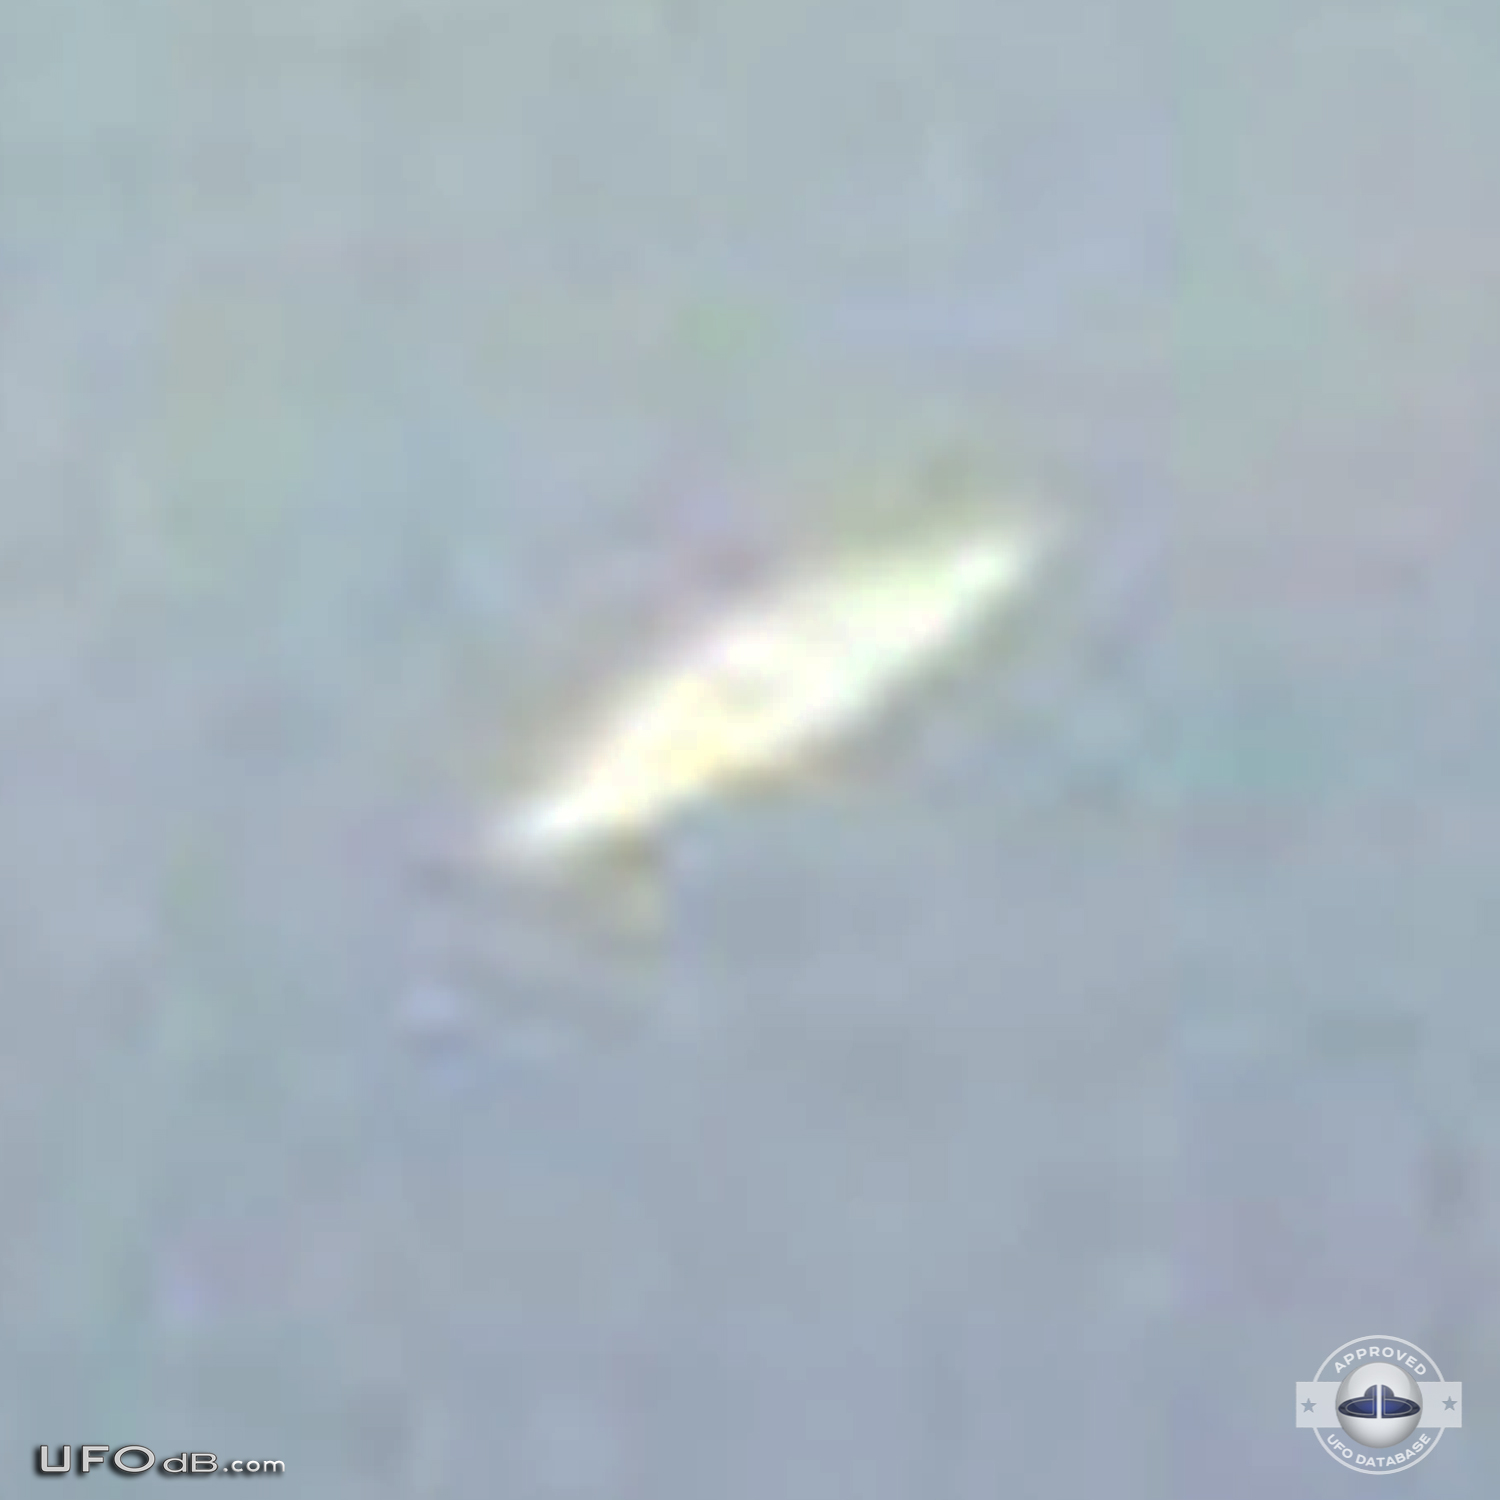 White Saucer UFO caught on photo in Bahia Blanca, Buenos Aires - 2012 UFO Picture #522-5